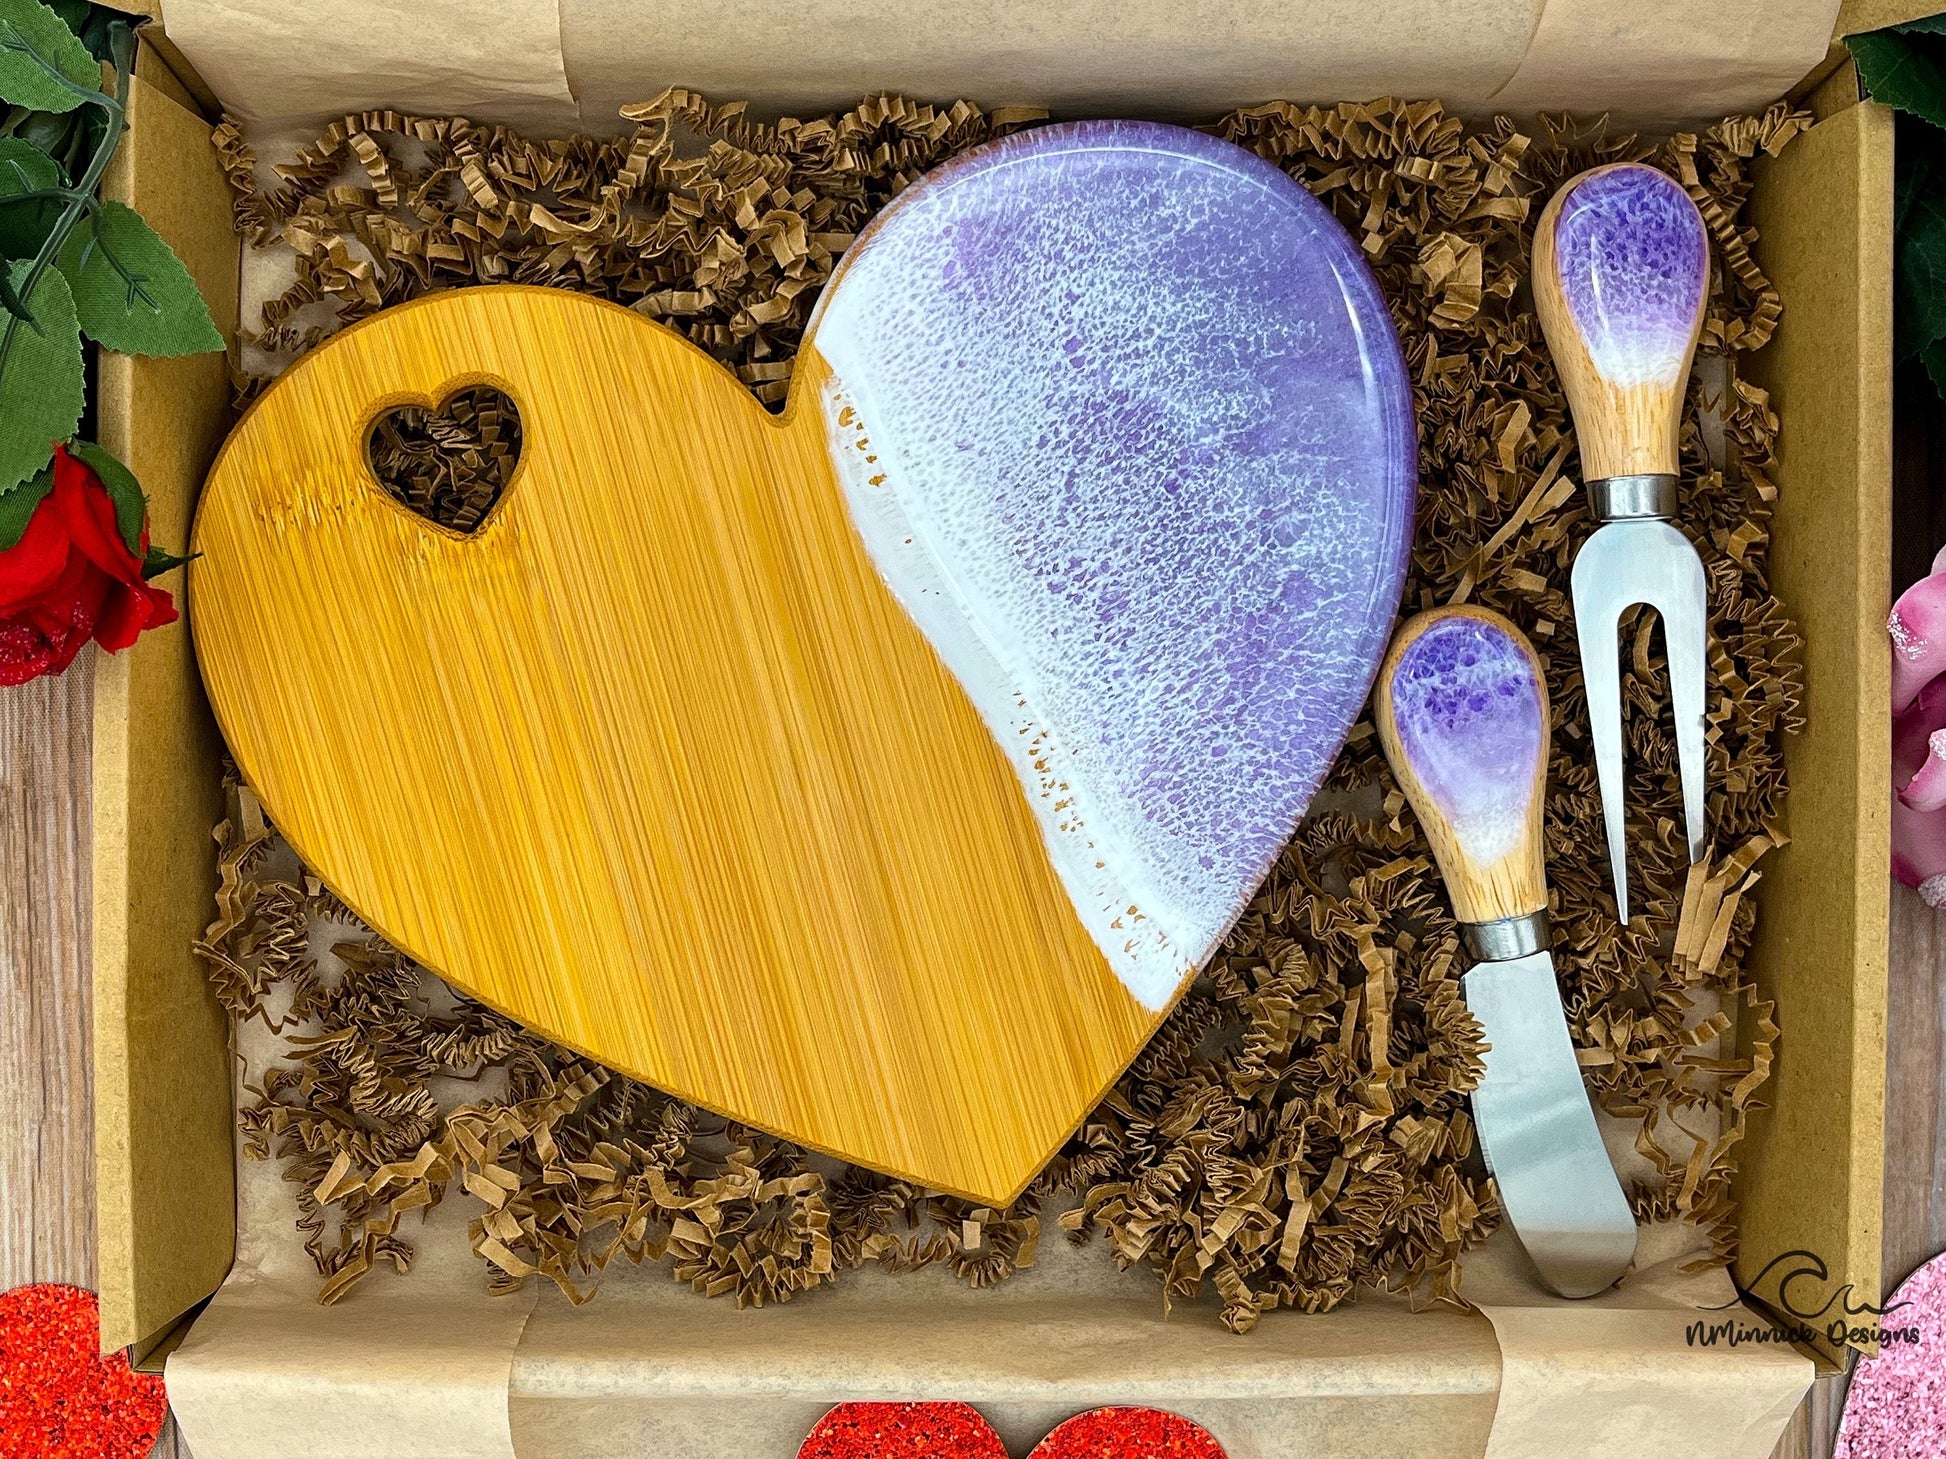 Ocean Resin Mini Heart Shaped Cheese Tray, Valentine Gift Set, Charcuterie Board, Beach Lover Gift, Valentines Gift, Coastal Gift